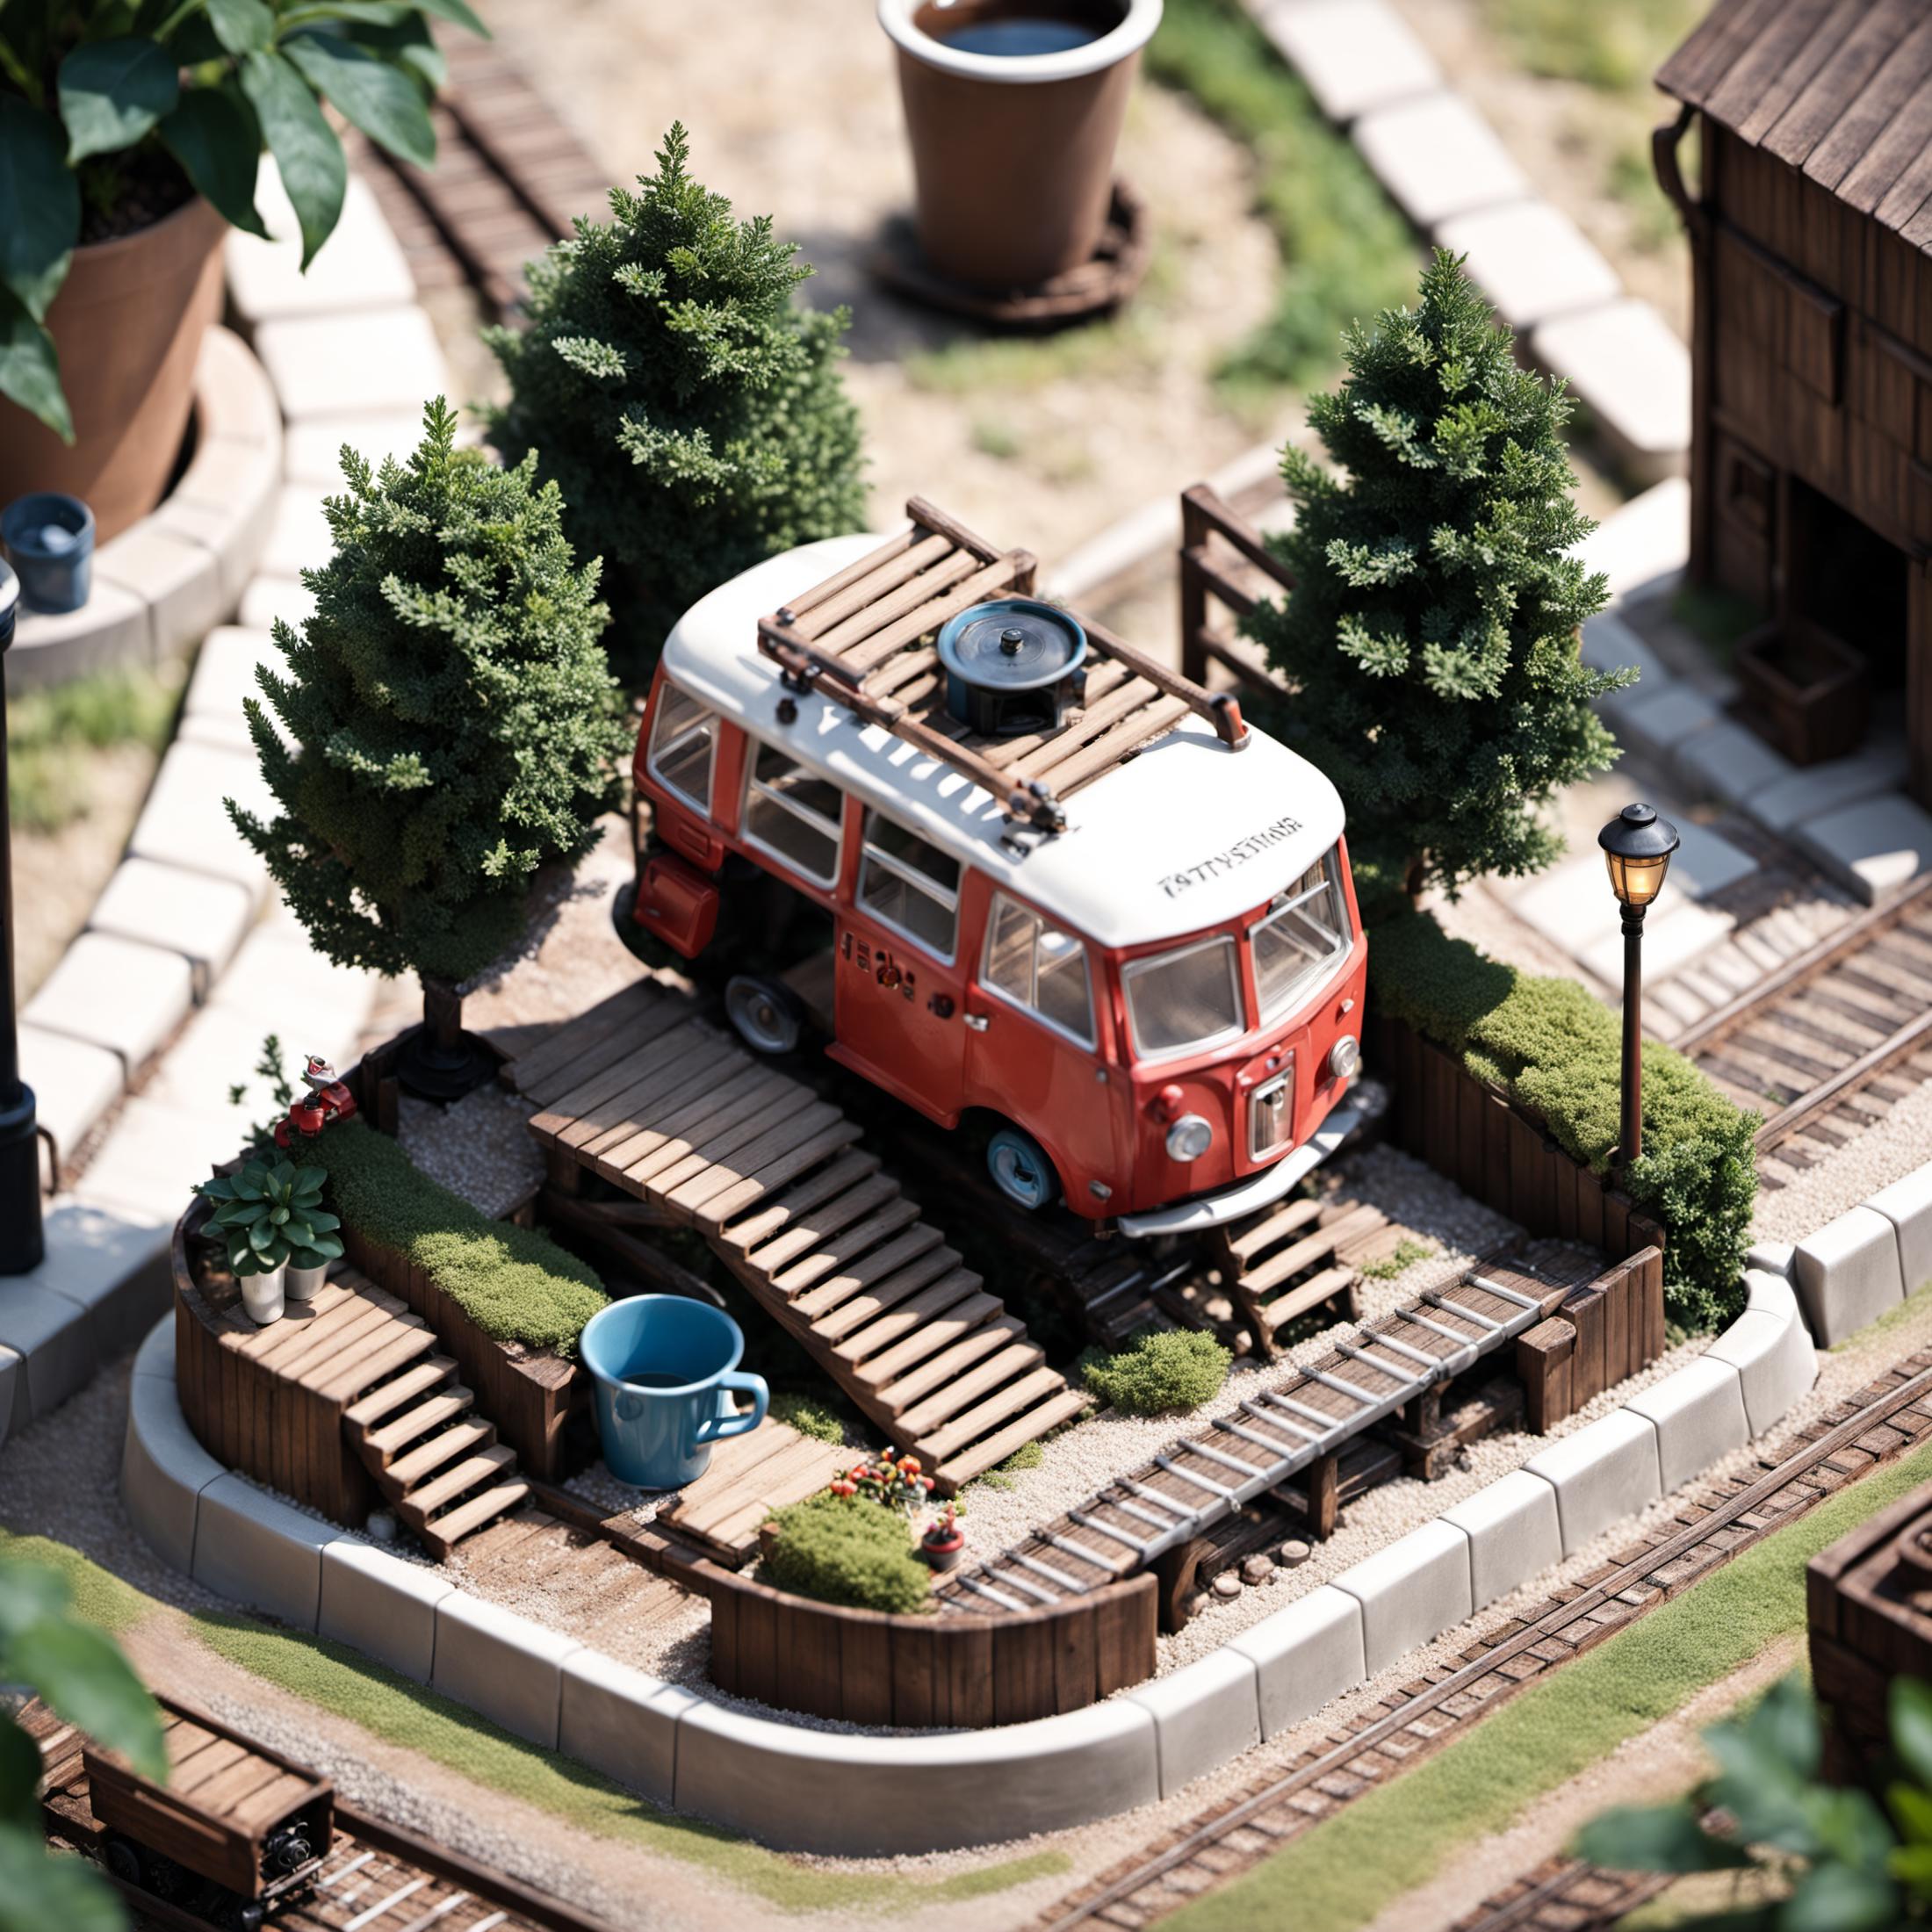 A model of a red and white bus on a miniature track with a small building.